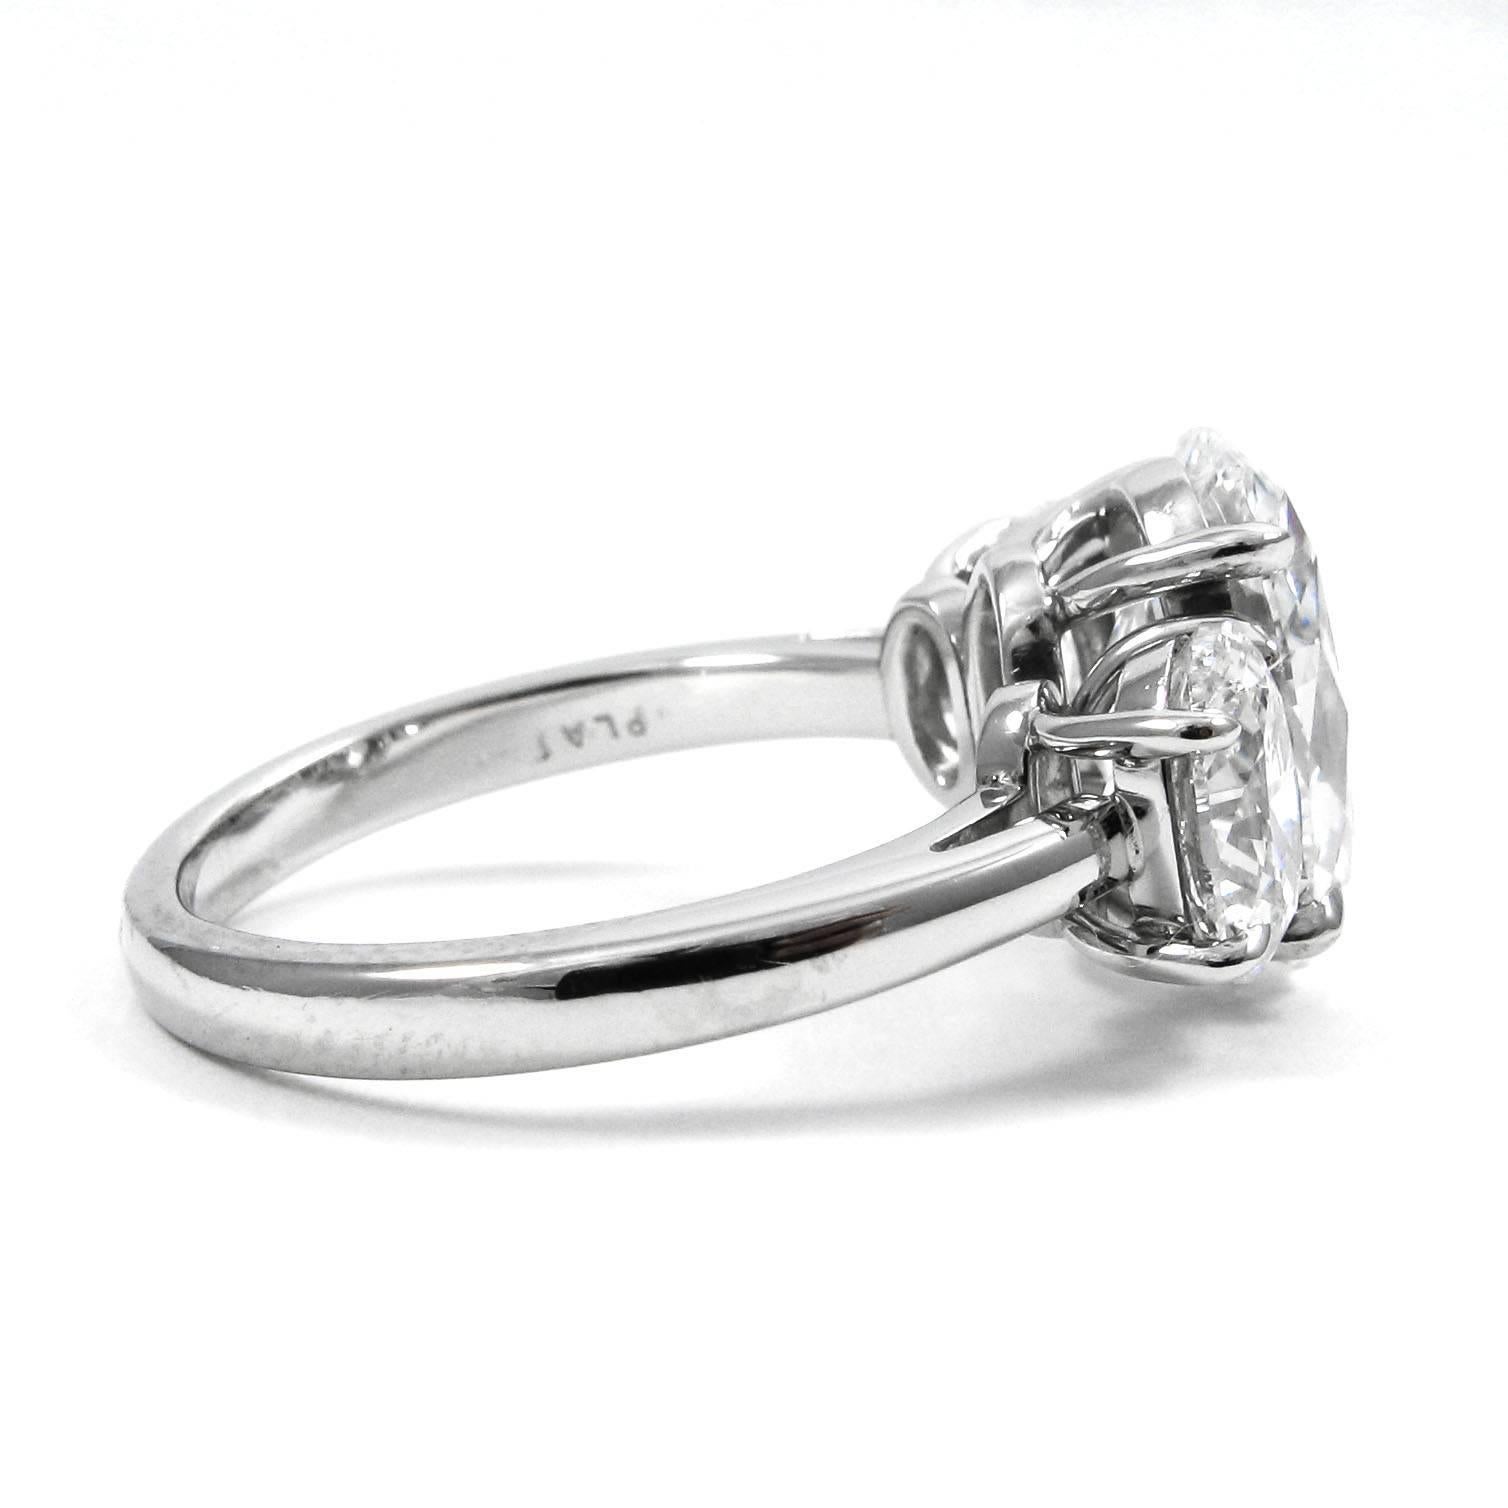 Oval Cut 3.08 Carat Oval GIA Certified D VS2 Diamond Three-Stone Ring with 2.04 ct sides